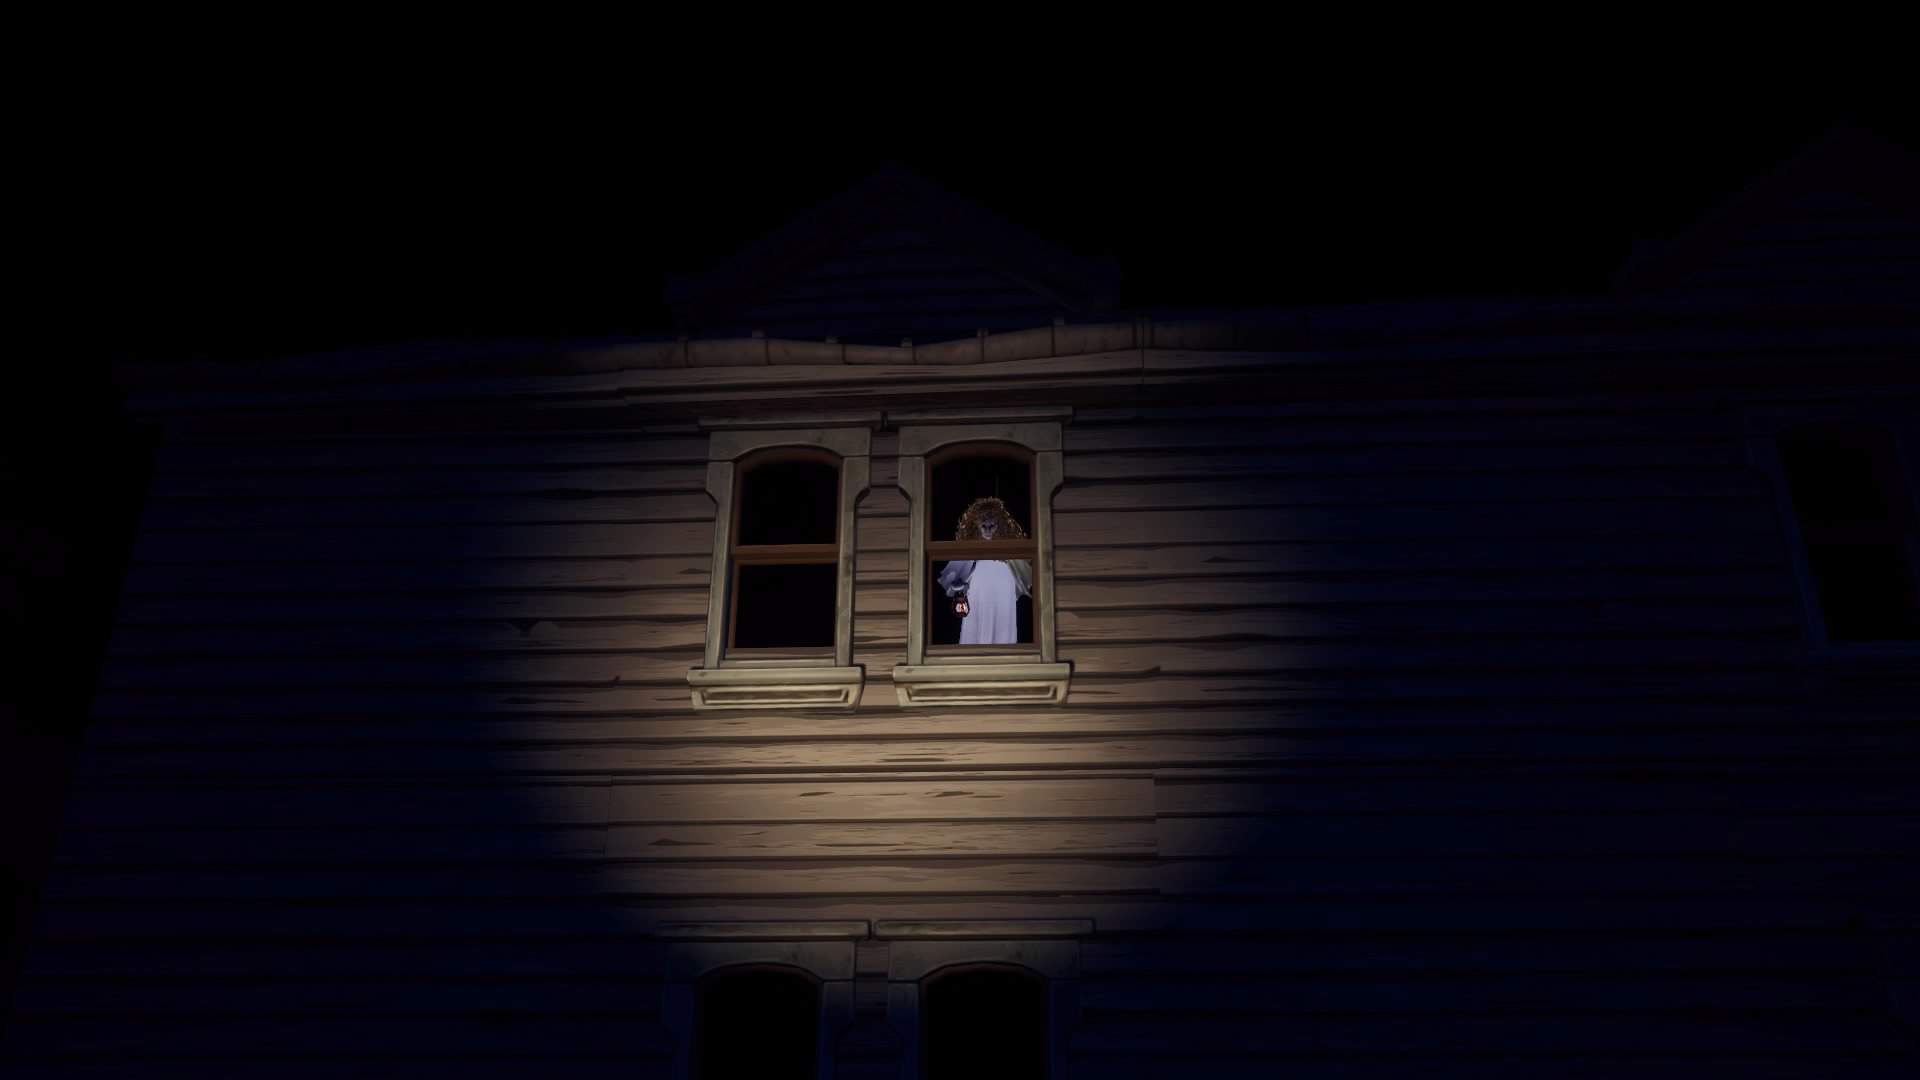 game the conjuring house